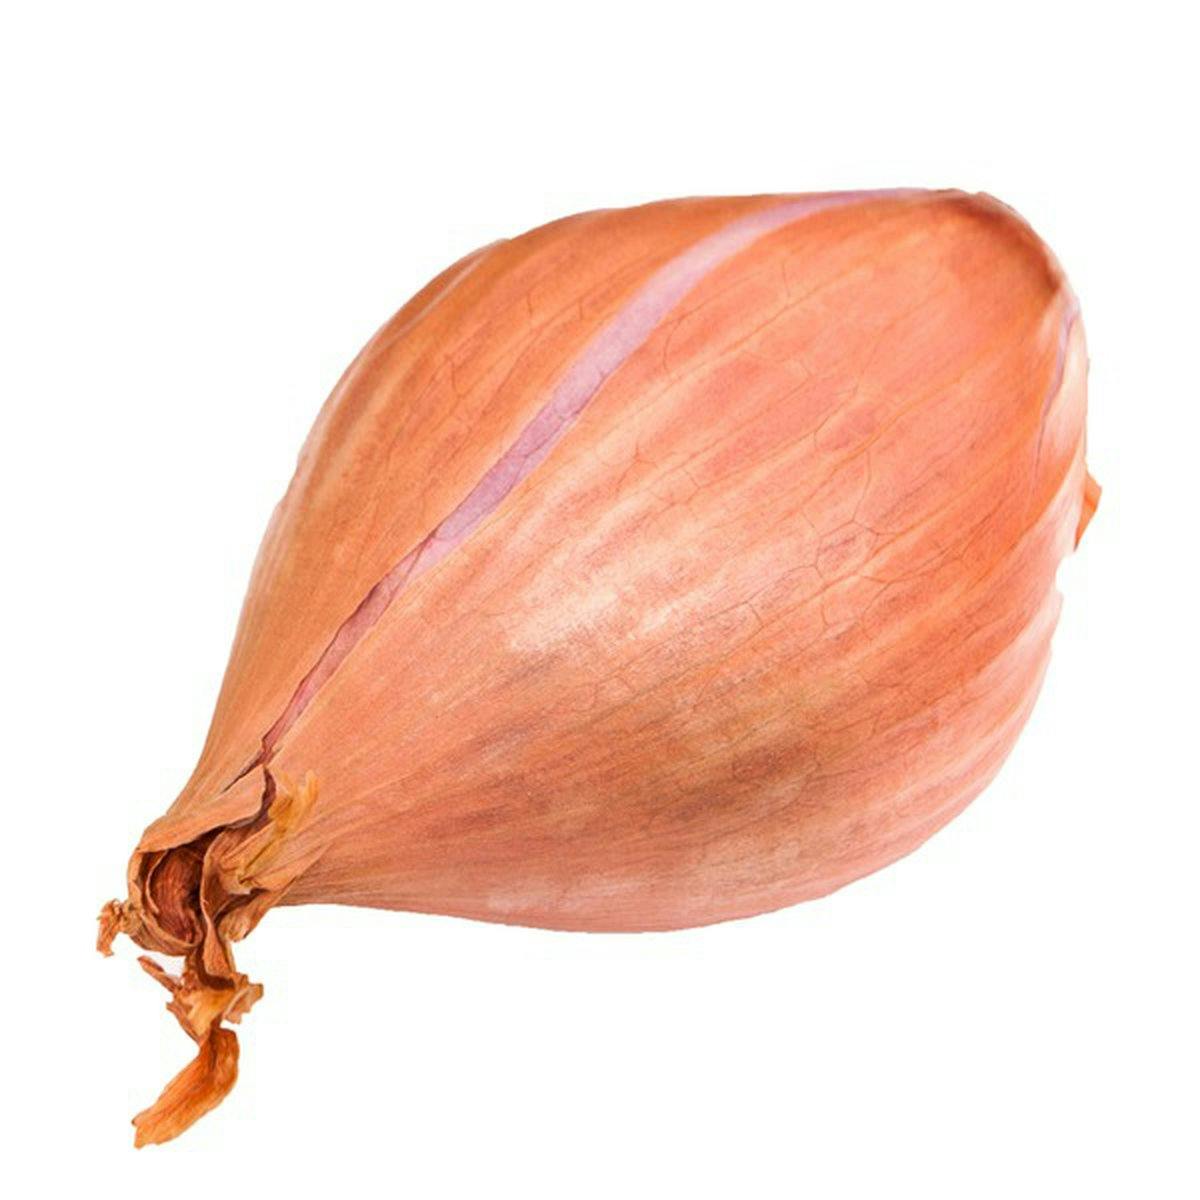 shallots thinly sliced